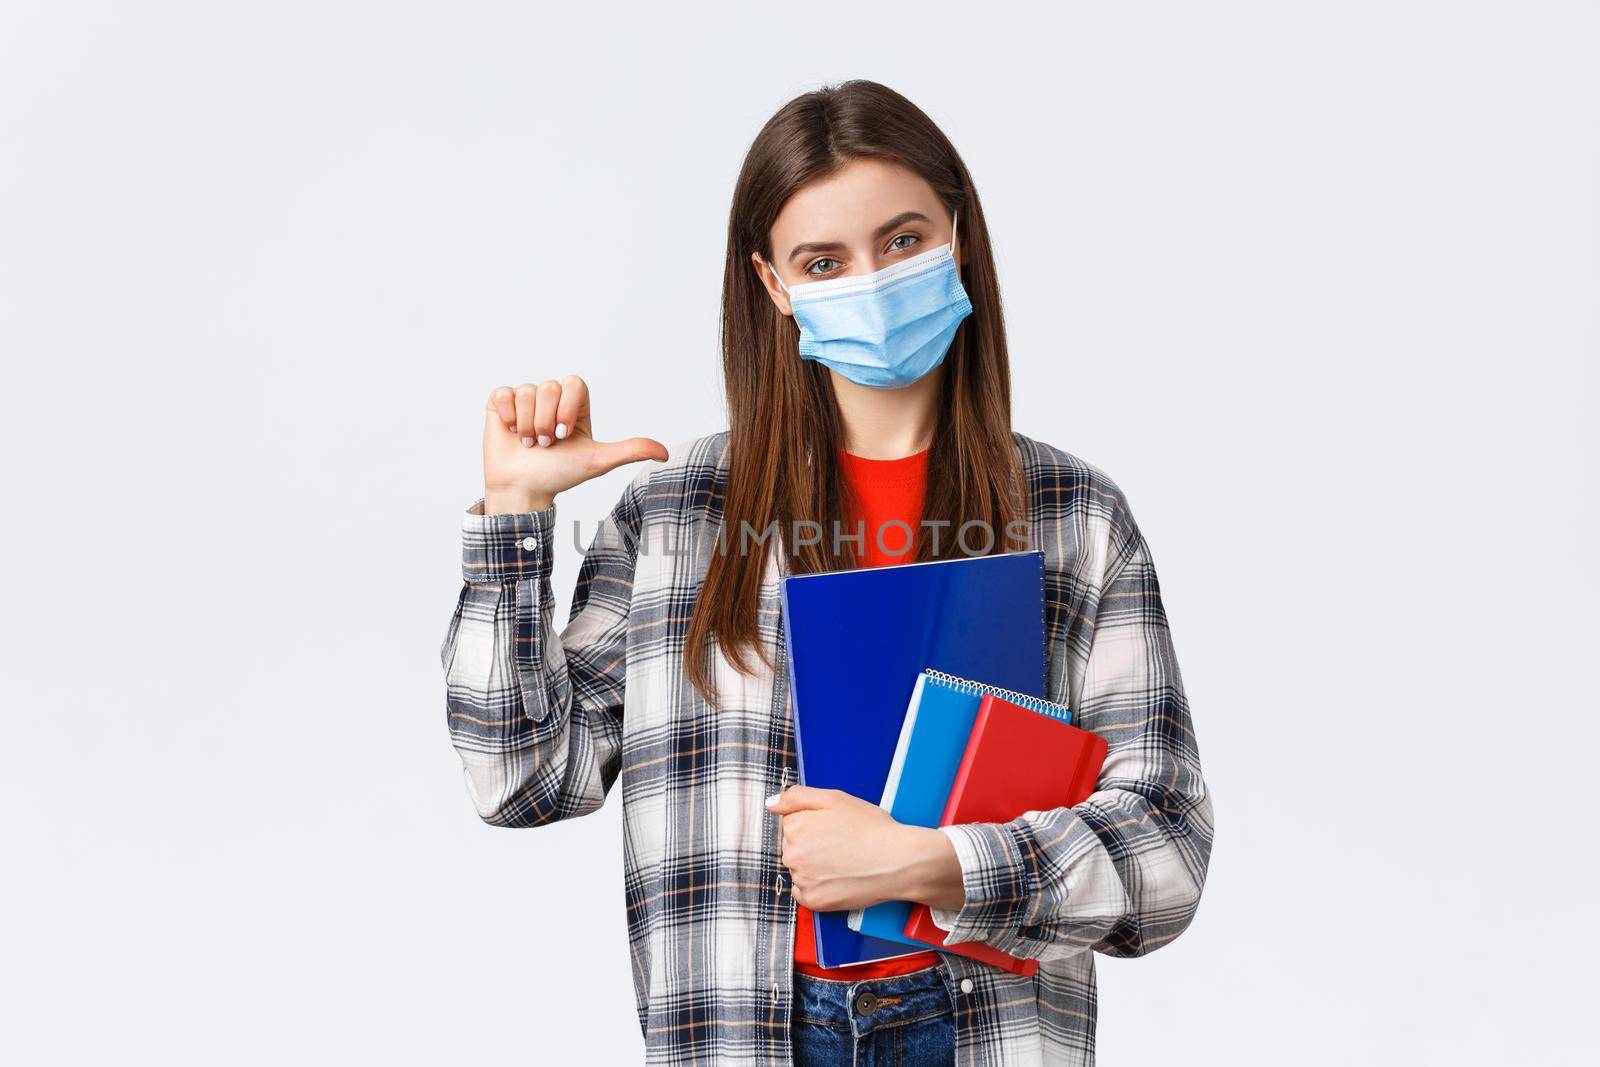 Coronavirus pandemic, covid-19 education, and back to school concept. Confident sassy female student pointing herself, wear medical mask, studying at university, holding notebooks.